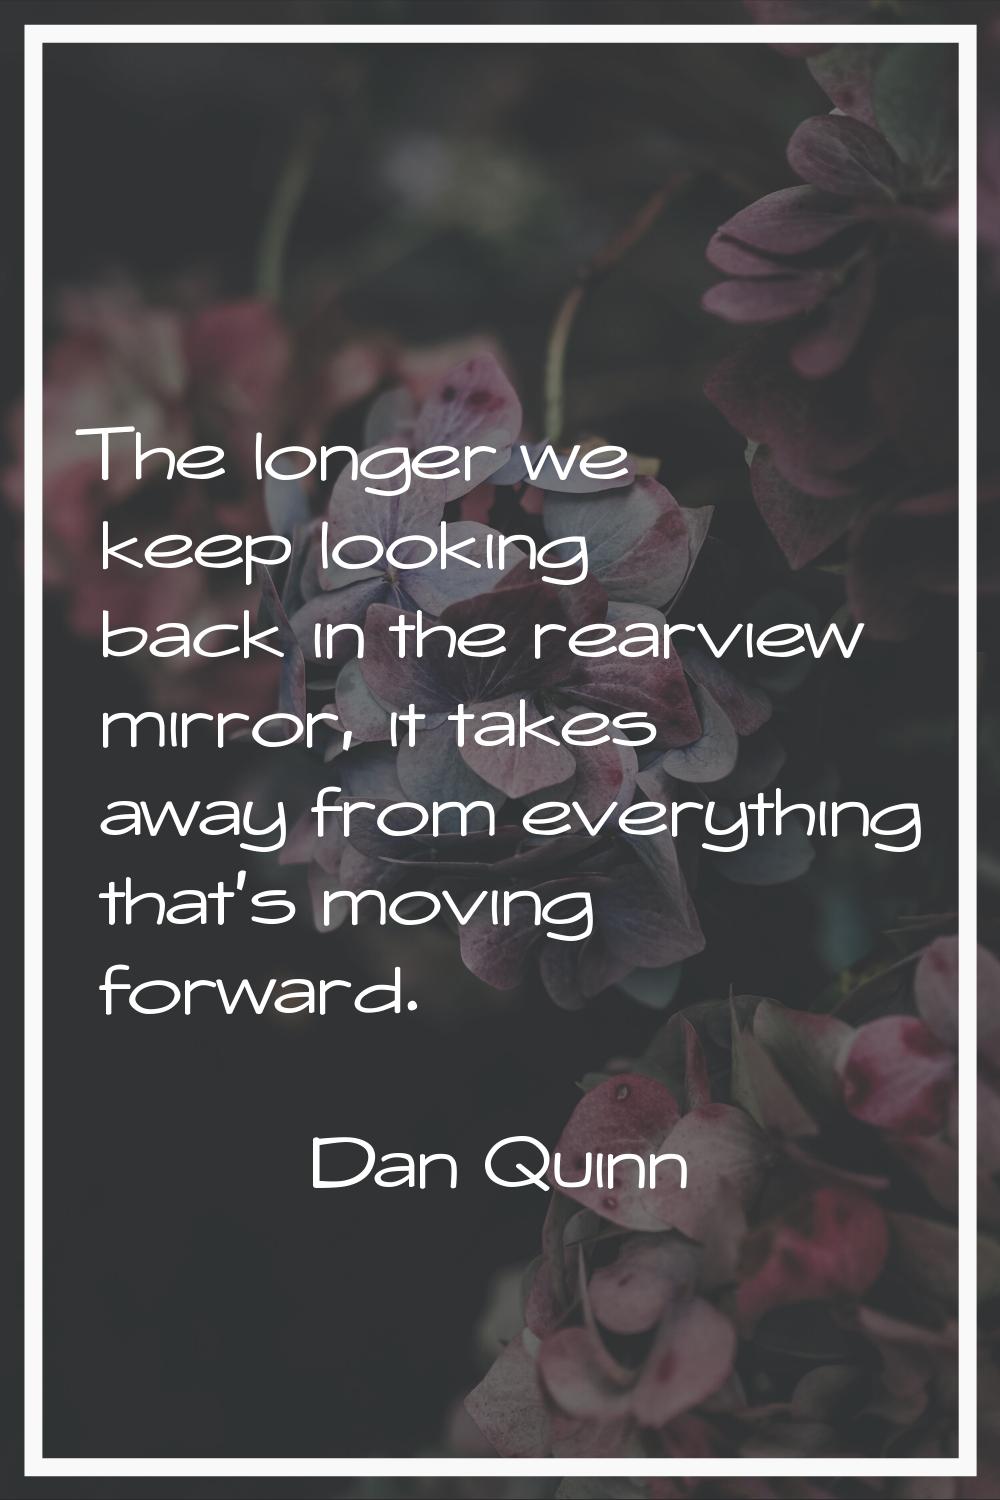 The longer we keep looking back in the rearview mirror, it takes away from everything that's moving